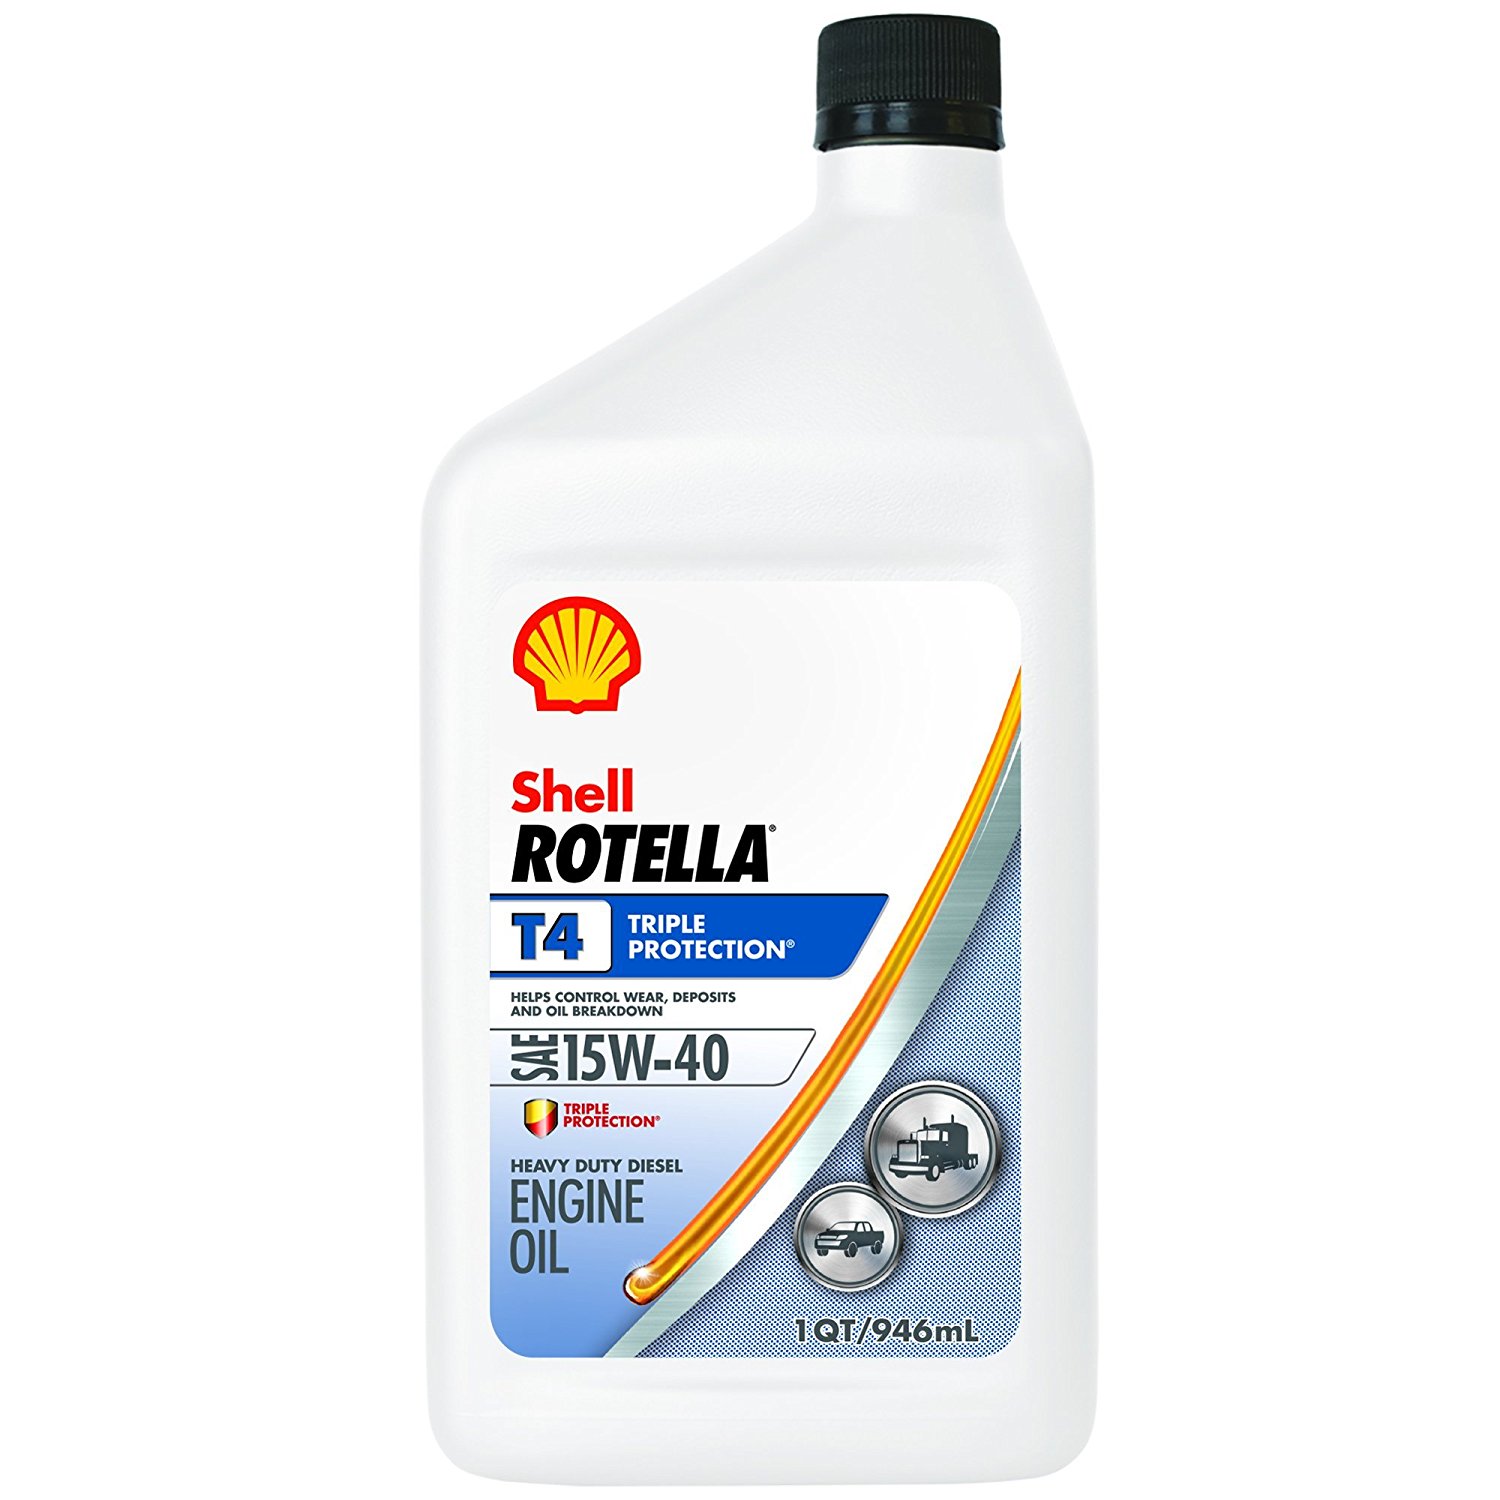 Shell Rotella Motor Oil T4 Triple Protection 15W-40